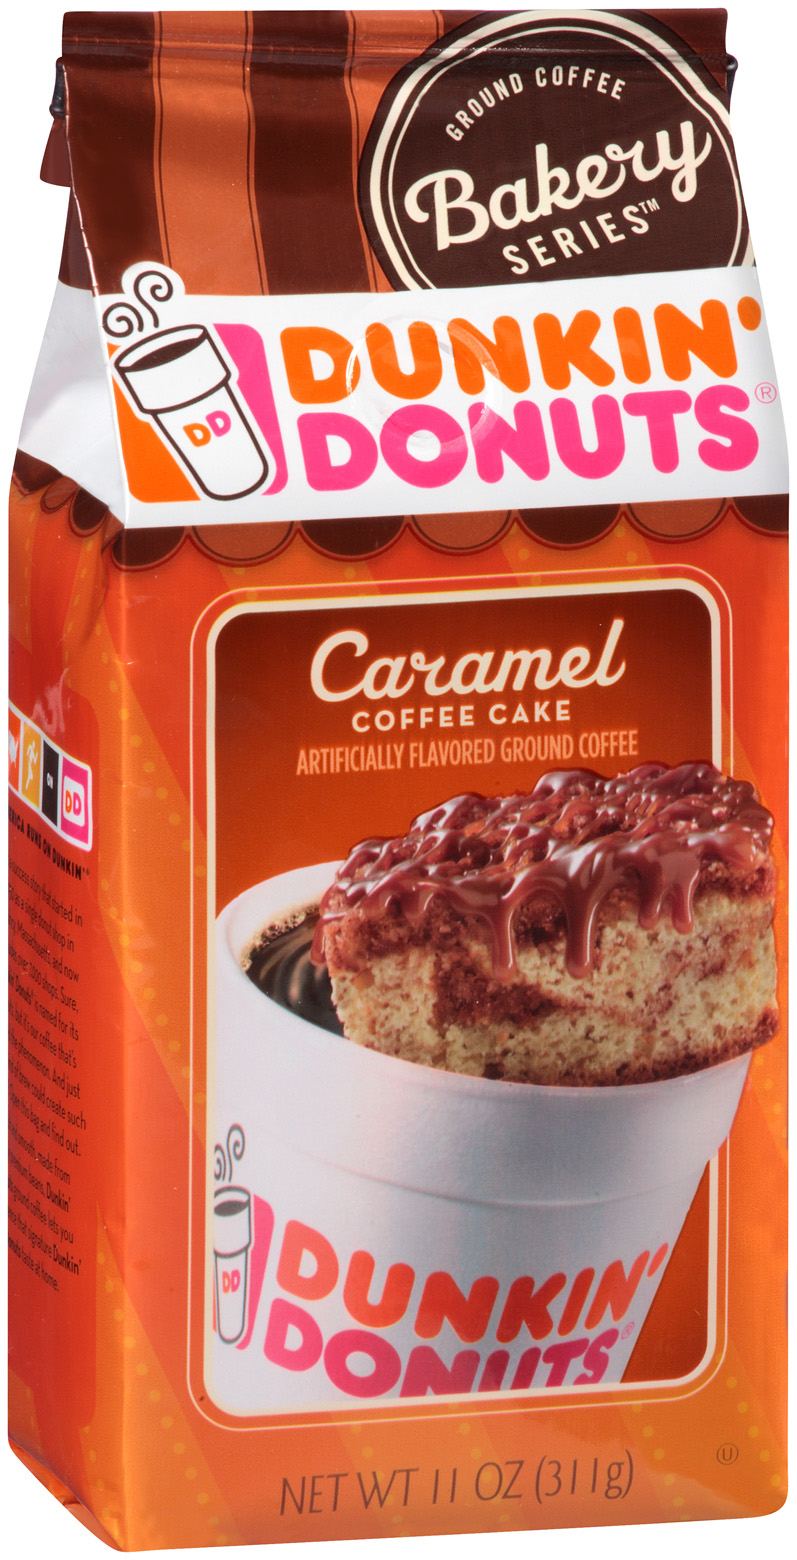 DUNKIN’ DONUTS® BAGGED COFFEE AND HUNGRY GIRL TEAM UP FOR